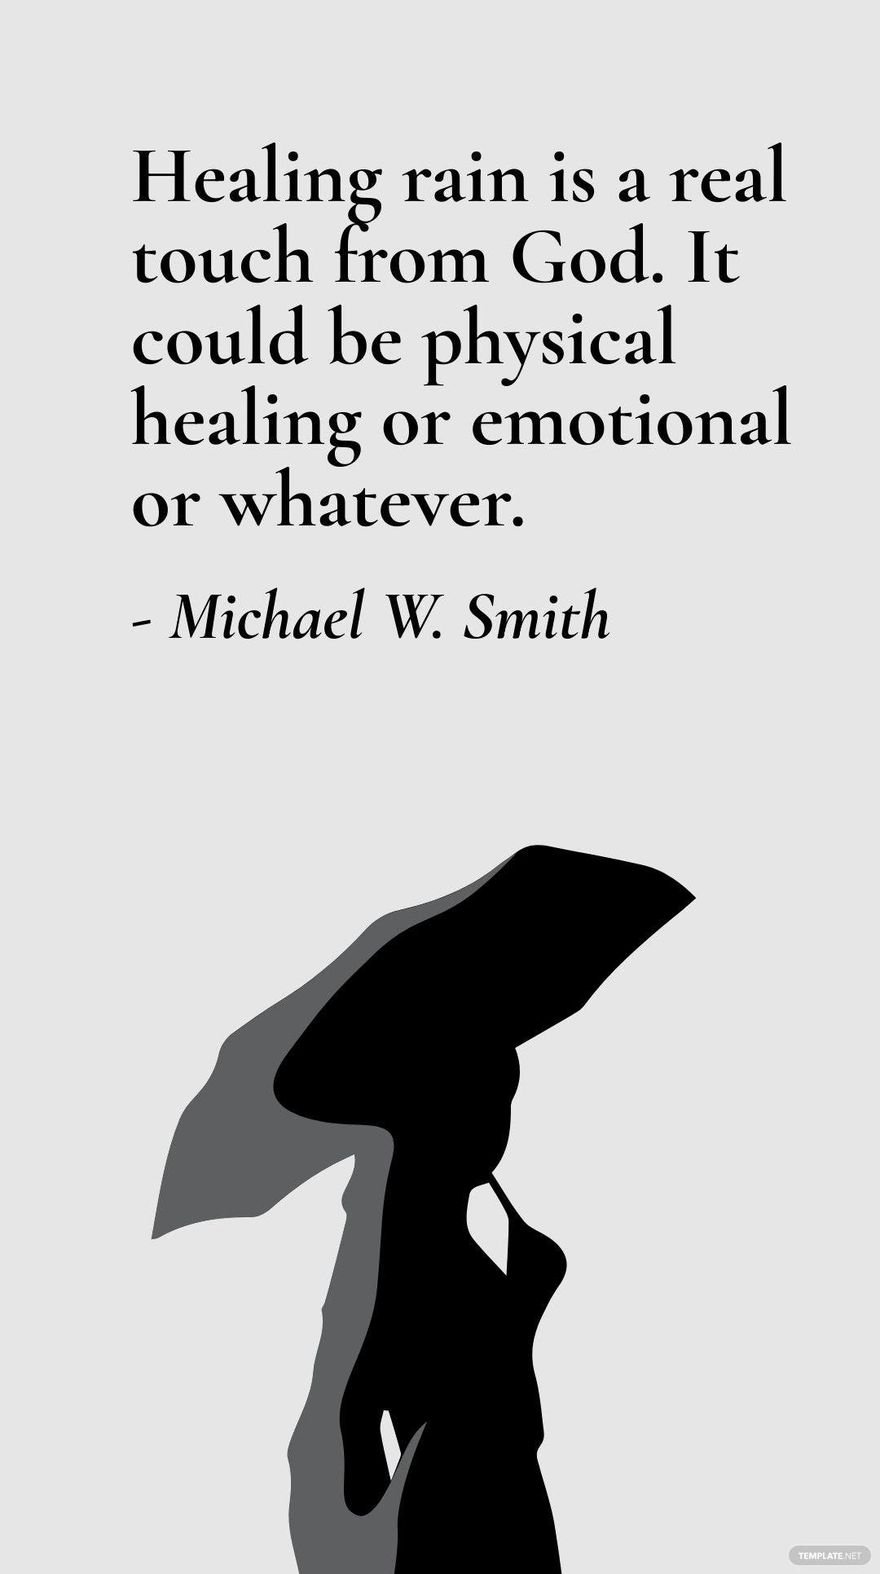 Michael W. Smith - Healing rain is a real touch from God. It could be physical healing or emotional or whatever.